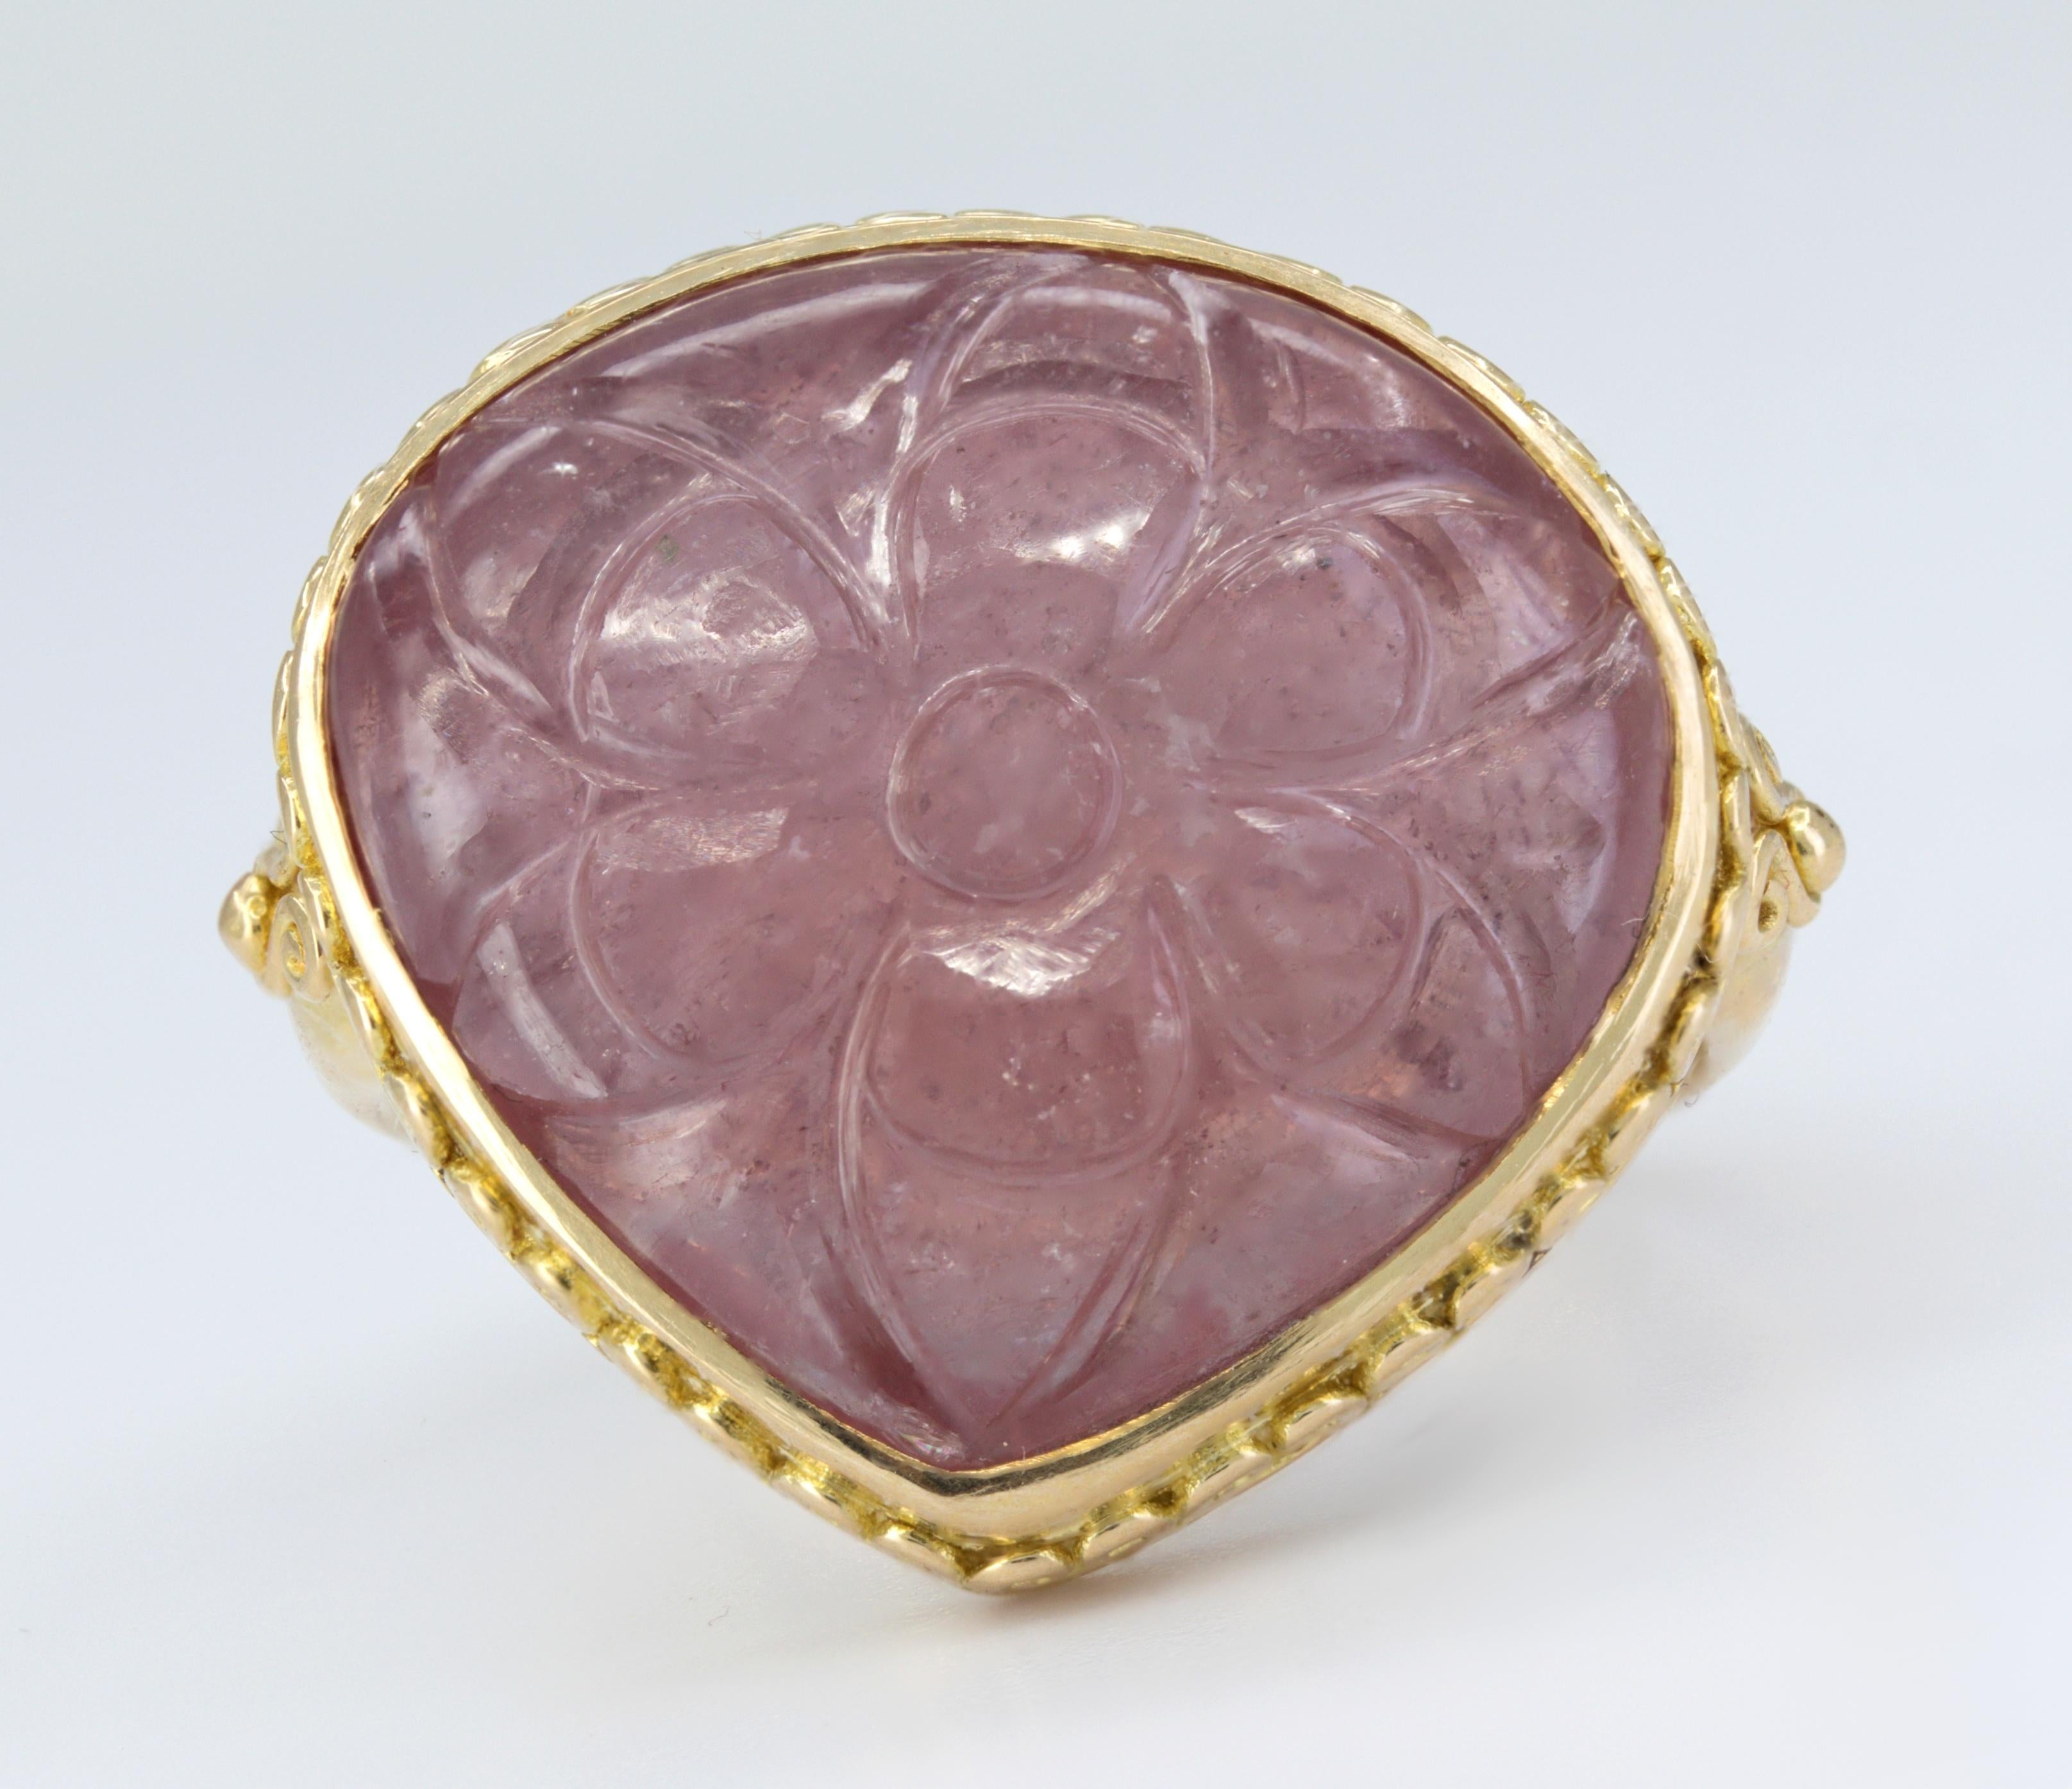 Featuring (1) carved pear-shaped ruby flower cabochon, 19.5 X 18.7 X 7.00 mm, bezel set in an 18k yellow gold, 20.5 X 21.3 mm tapering to 3.1 mm, size 5.25 (with inside ball sizer), marked BATTELLE 18K, Gross weight 12.47 grams.